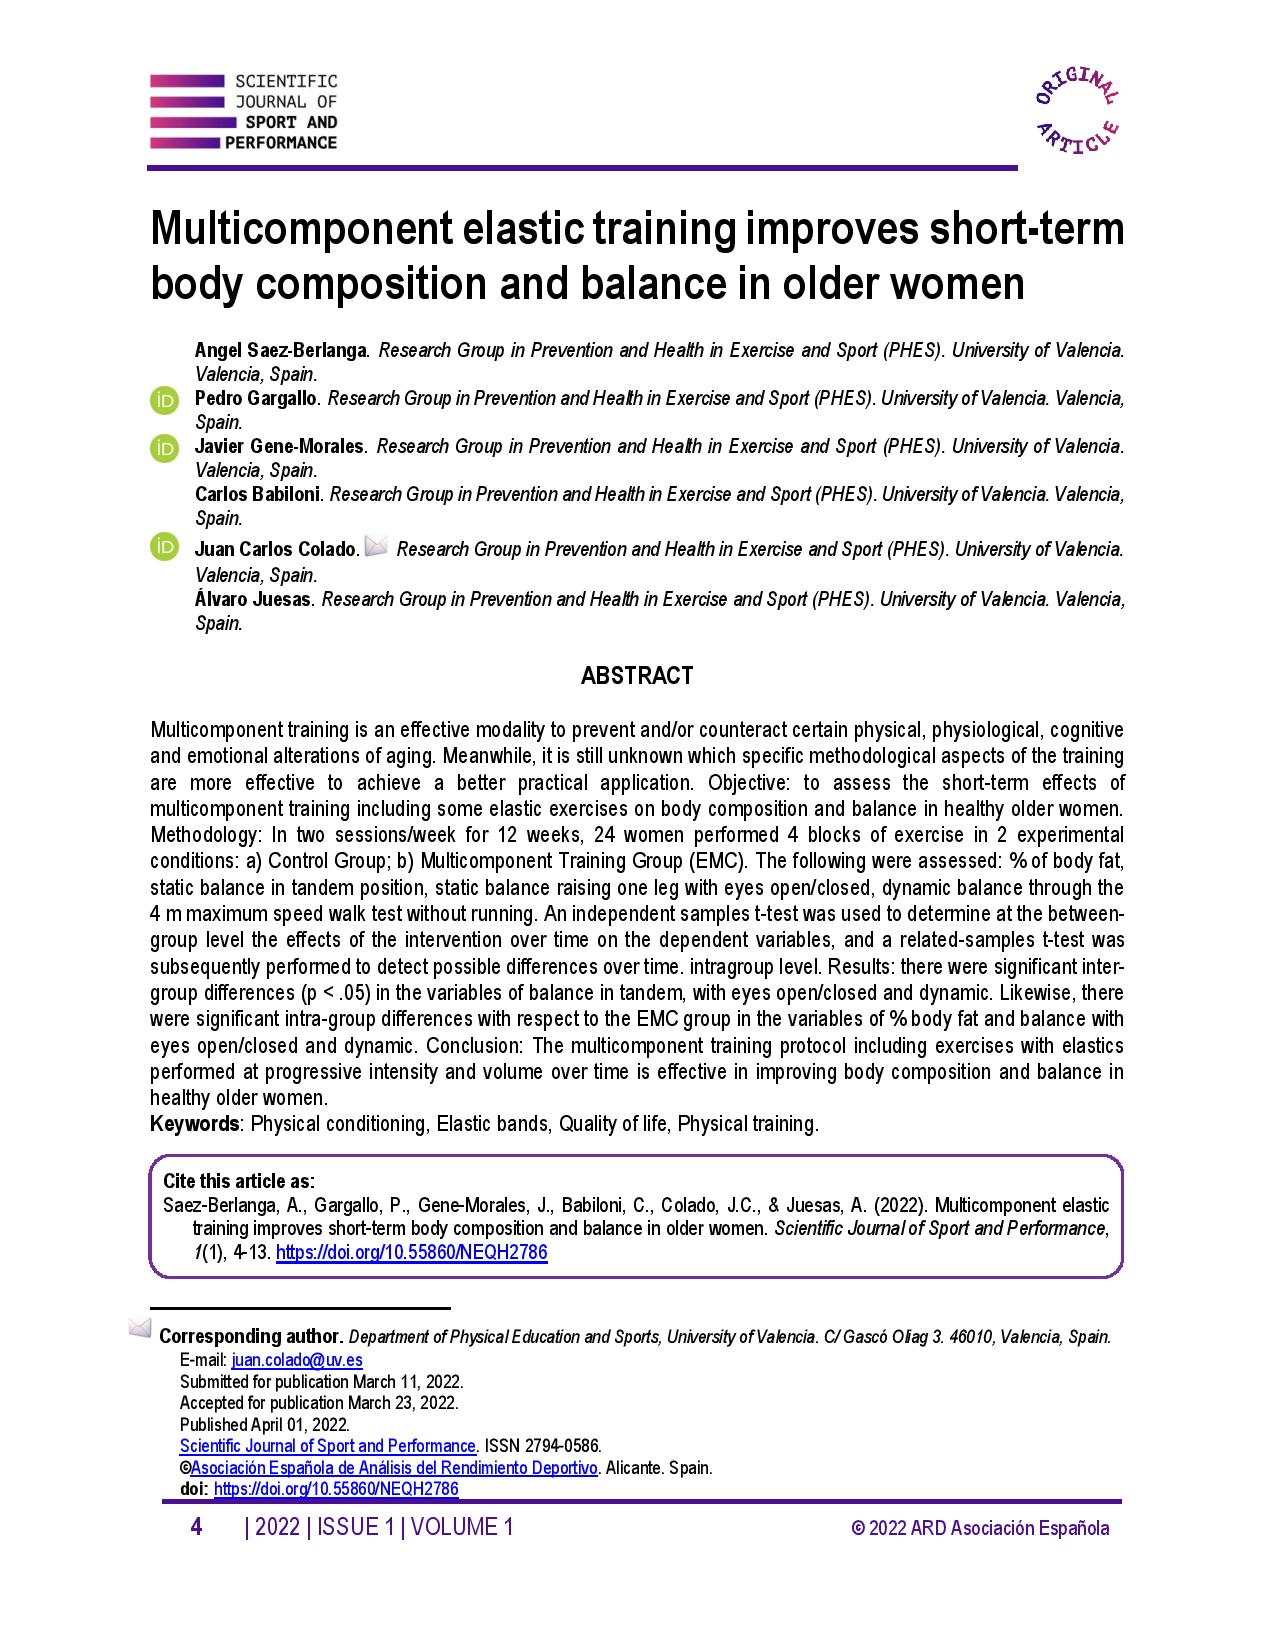 Multicomponent elastic training improves short-term body composition and balance in older women